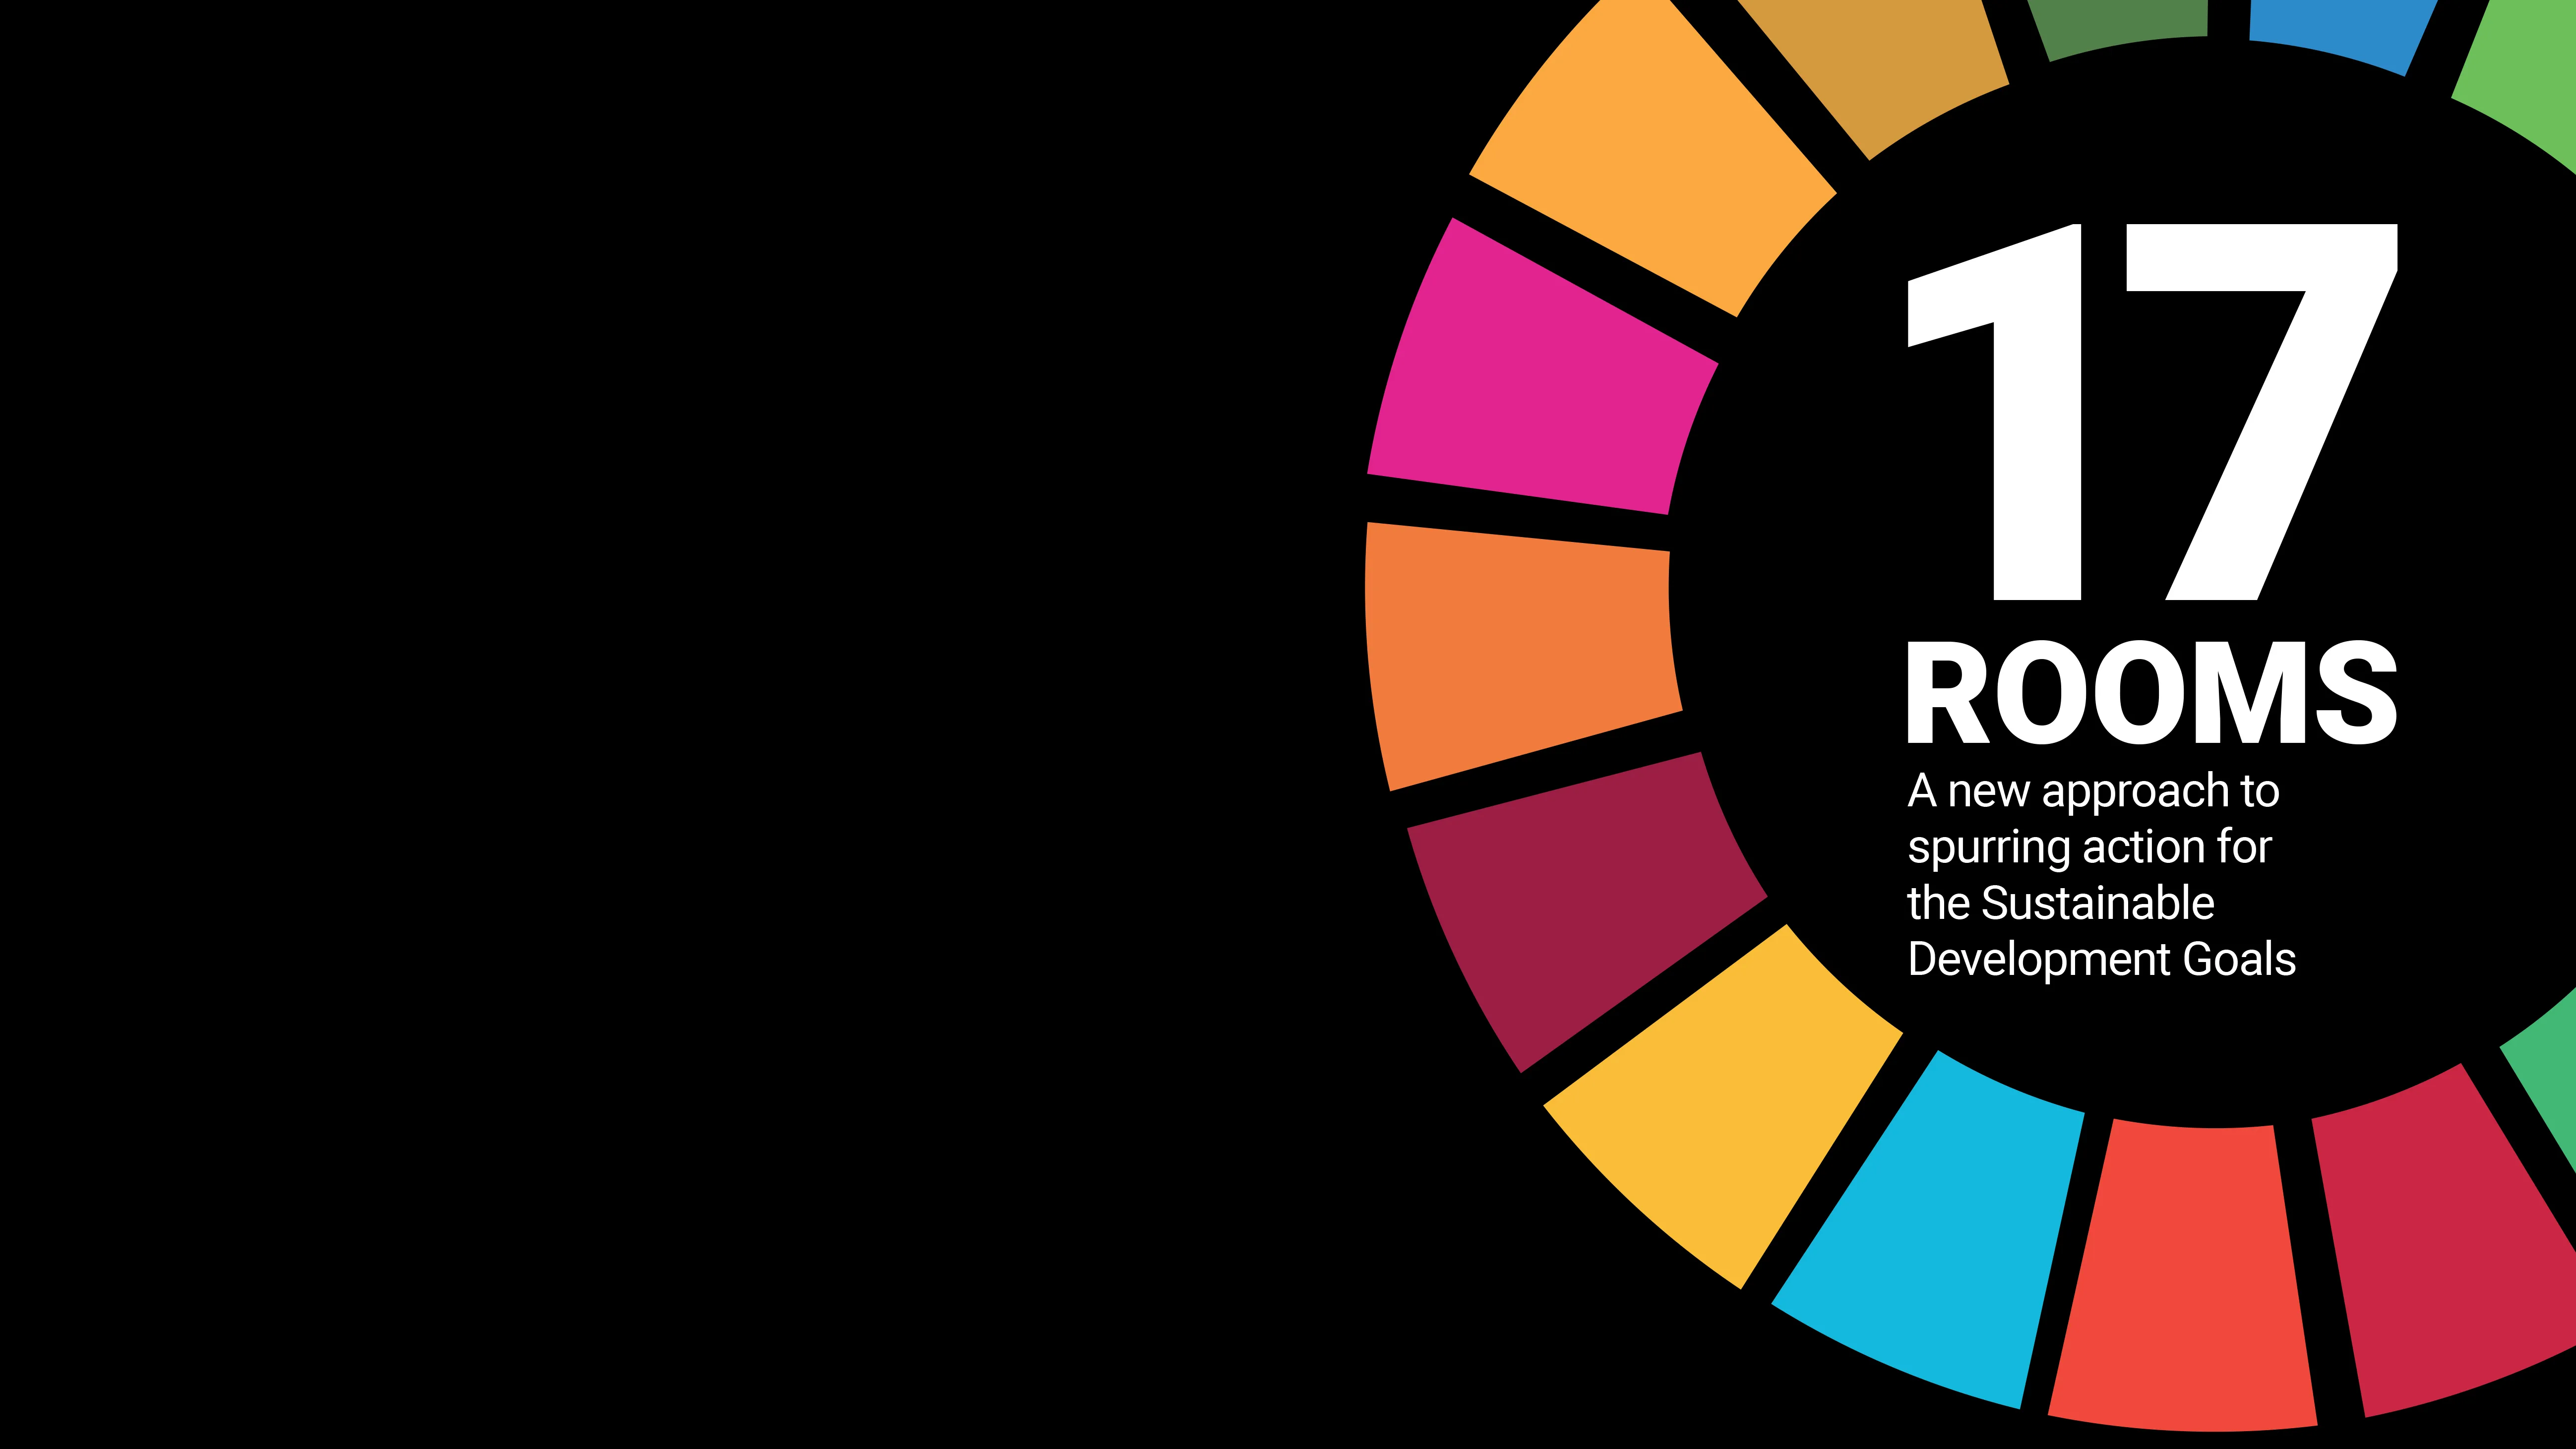 17 Rooms: A new approach to spurring action for the Sustainable